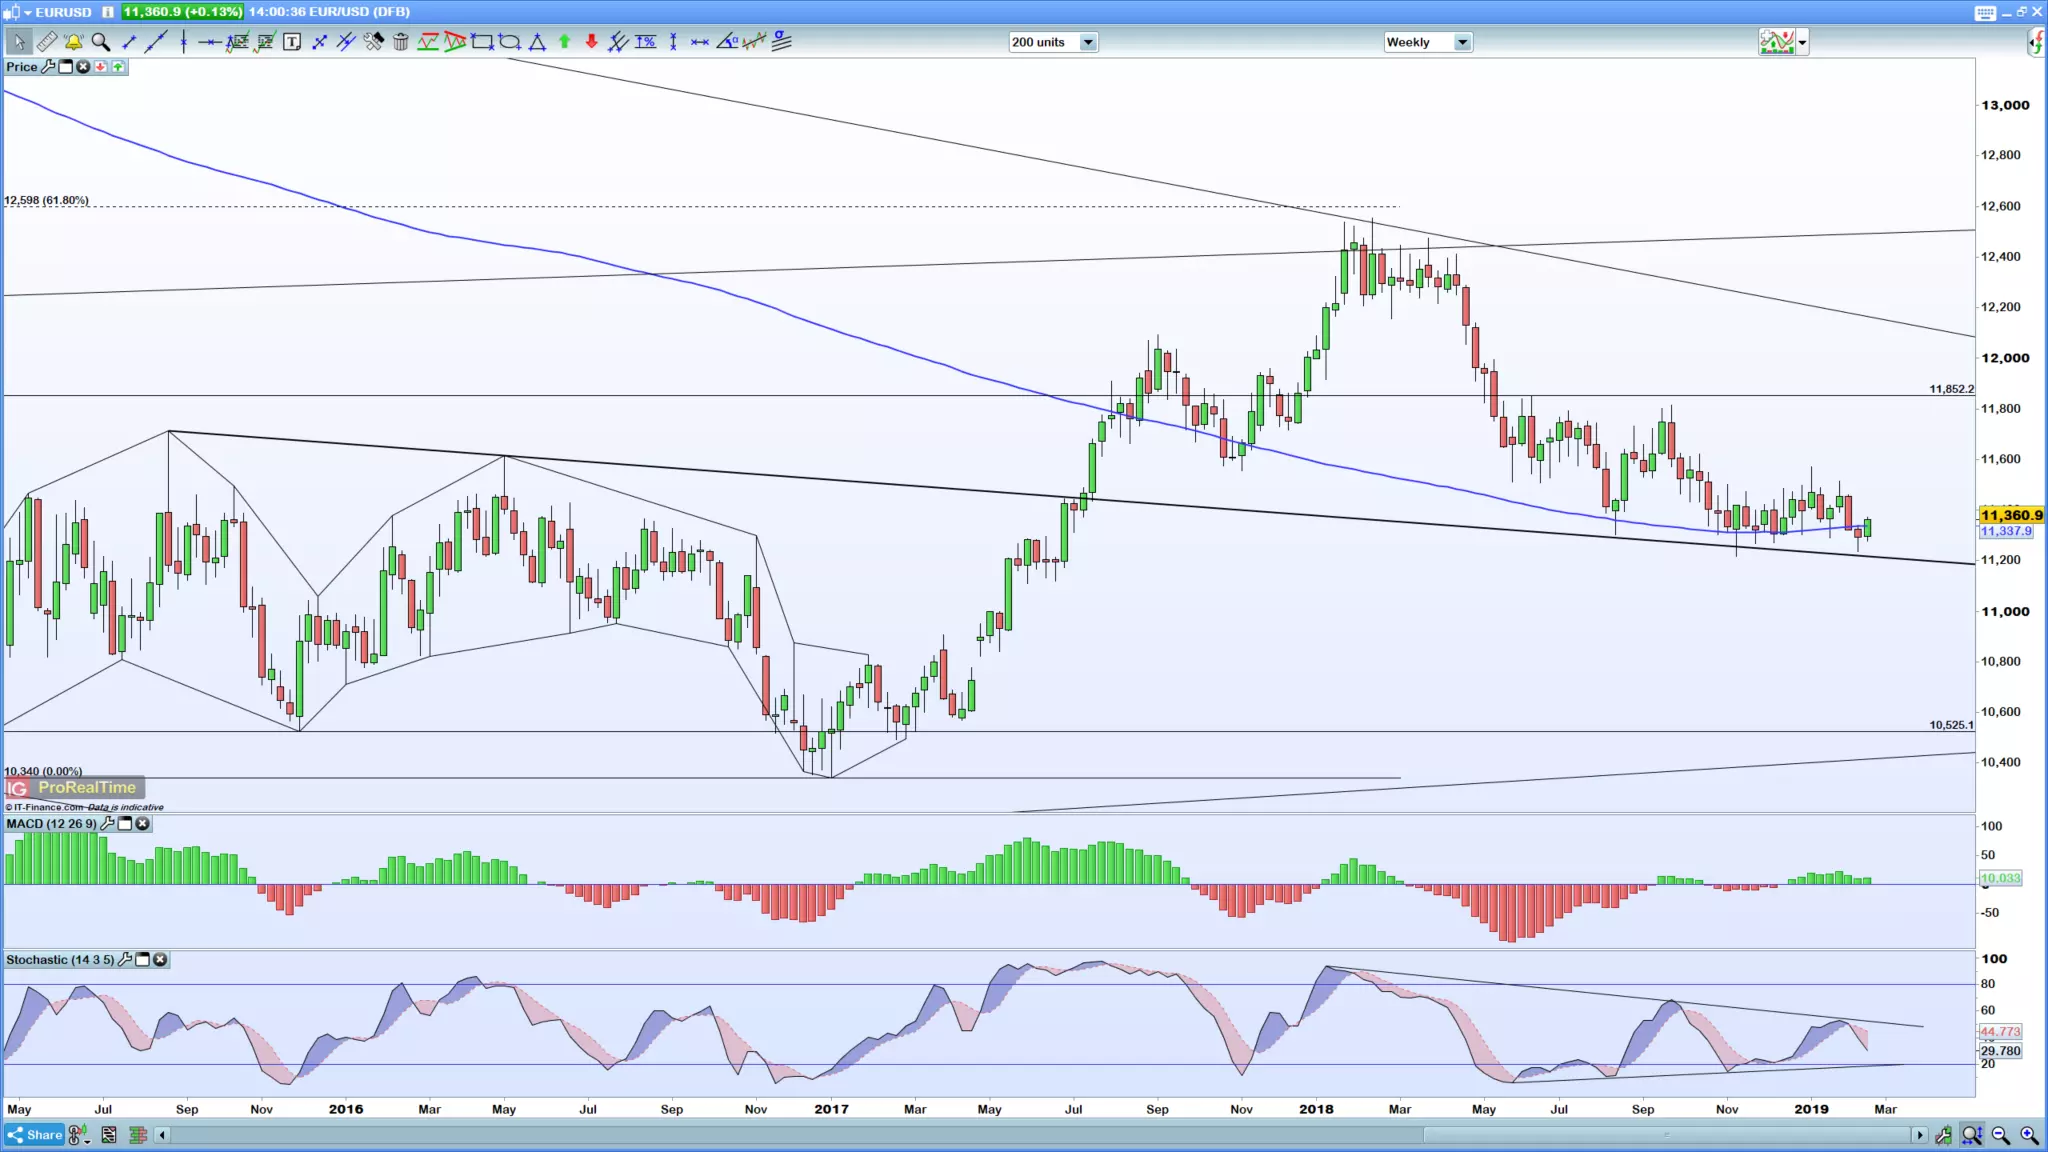 EUR/USD weekly chart